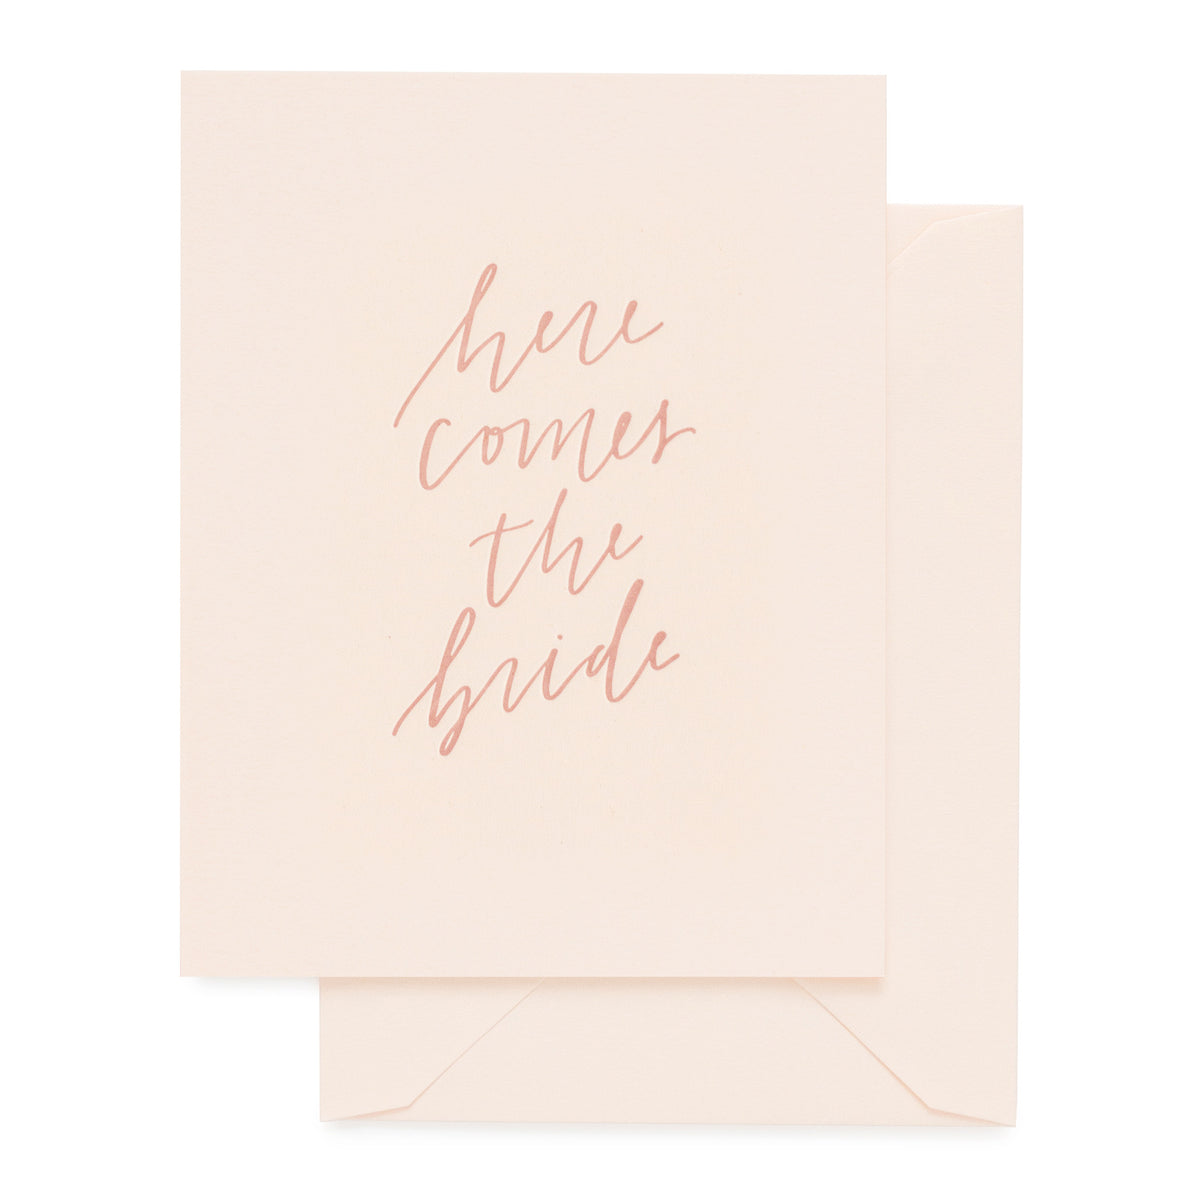 pale pink card with rose text and pale pink envelope